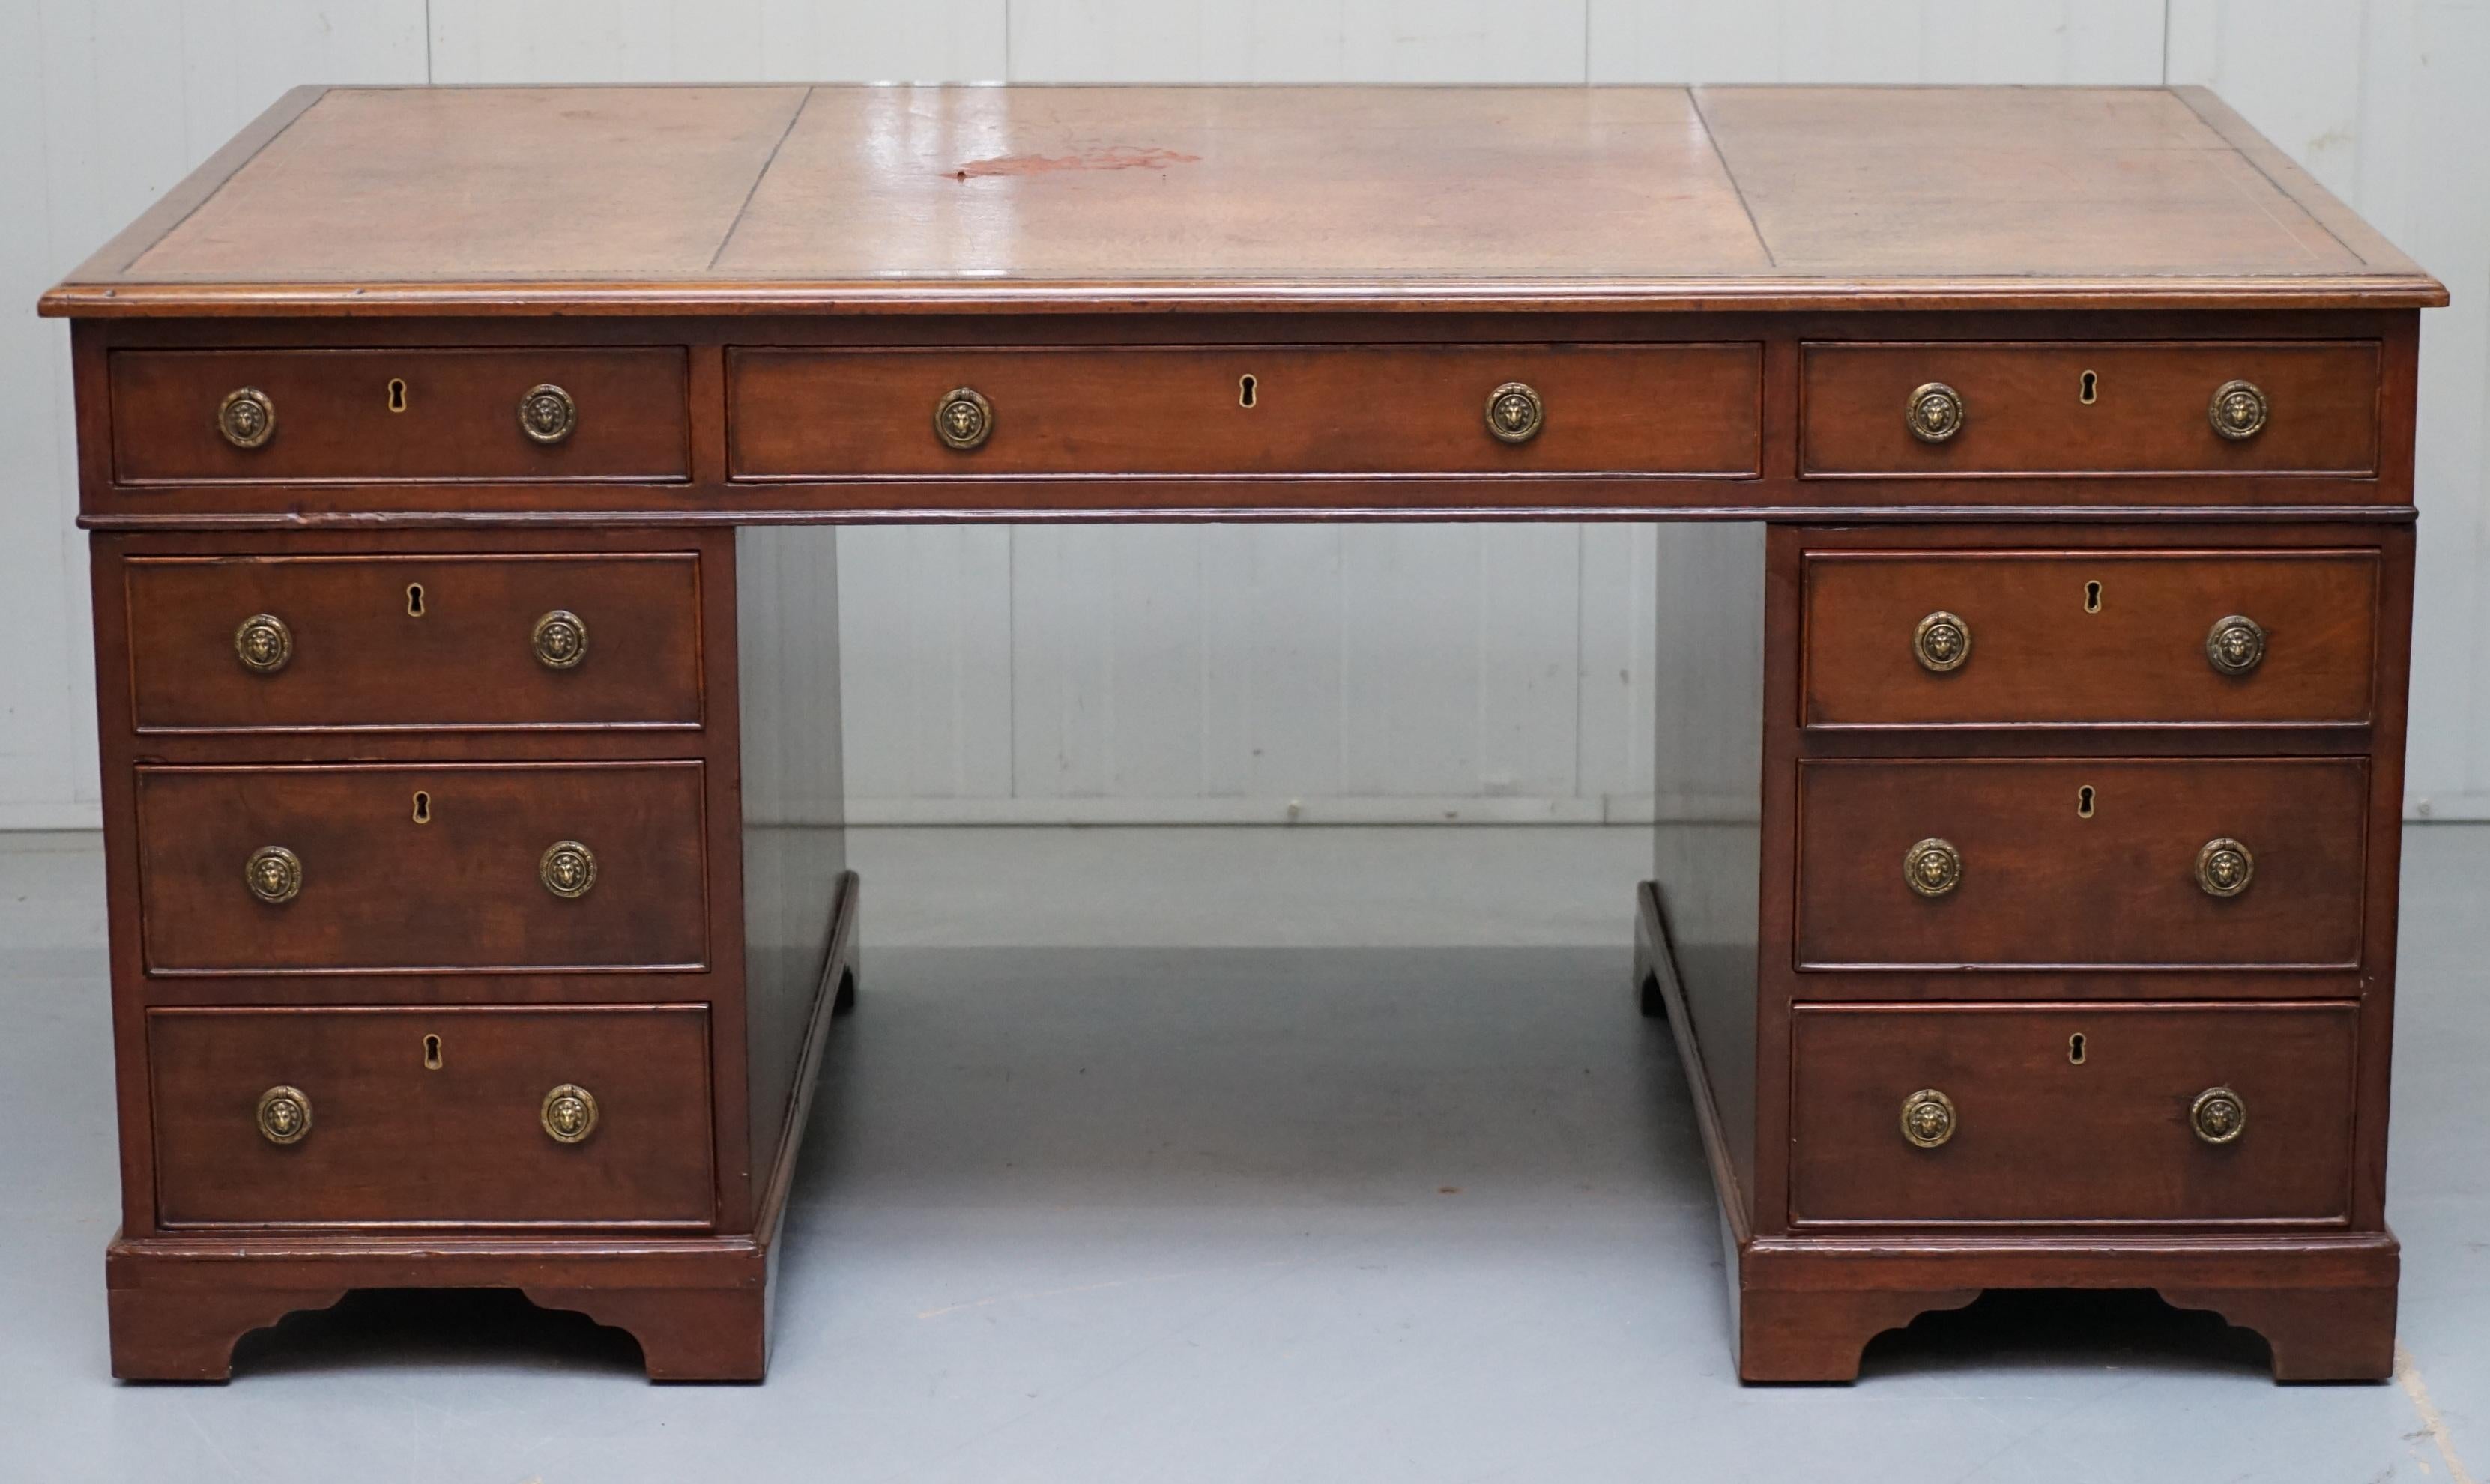 We are delighted to offer for sale this stunning very rare original George III circa 1780 walnut twin pedestal double sided partner desk with Lion head handles and brown leather surface

A very well made late 18th century desk, I have never seen